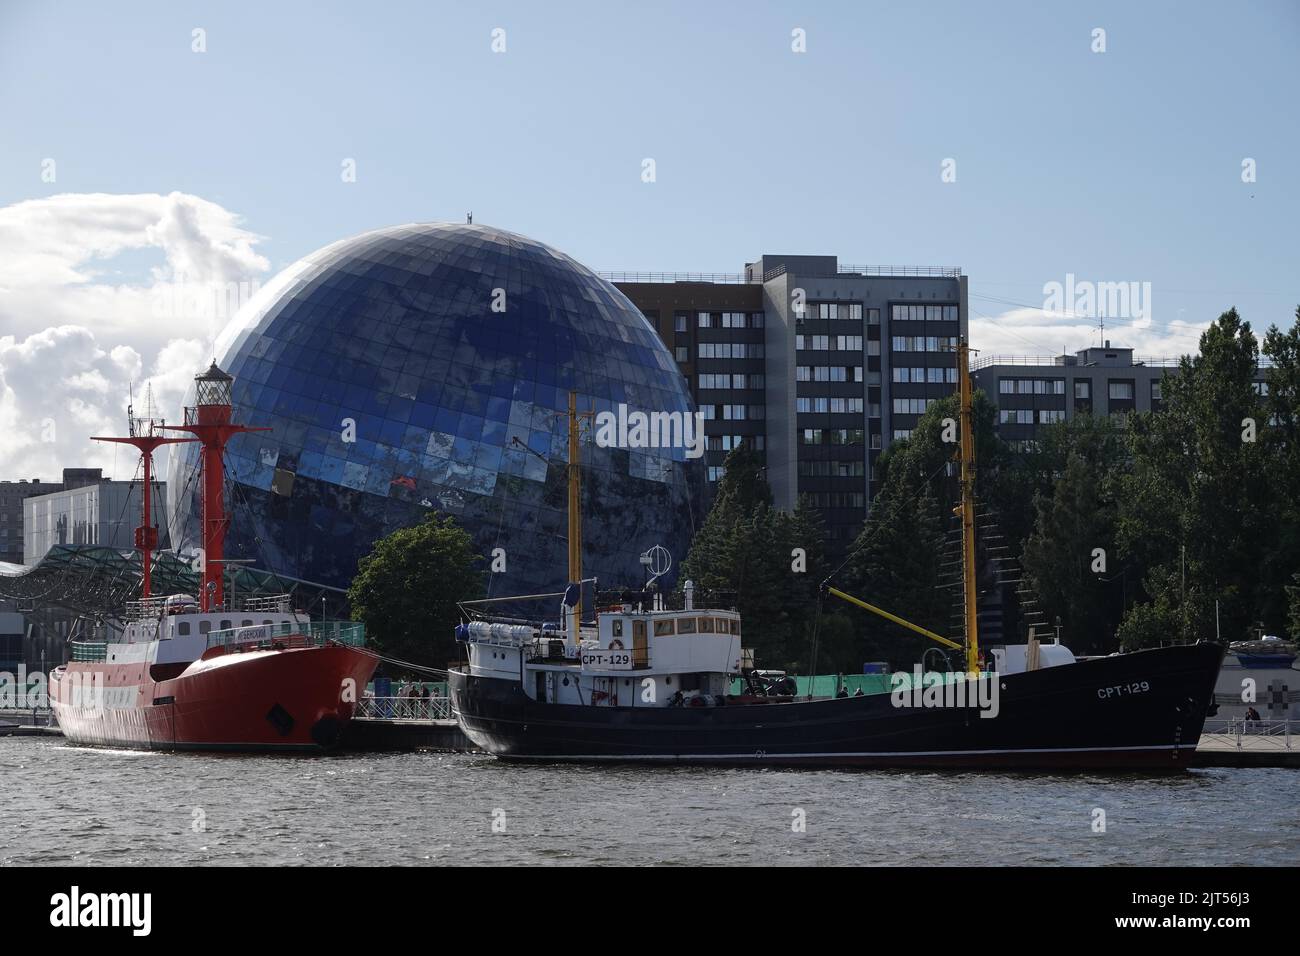 Kaliningrad, Russia. 15th July, 2022. Ships anchor in Russia's Baltic exclave of Kaliningrad, the city formerly known as Königsberg. (to 'Baltic Sea exclave Kaliningrad continues to complain about sanctions pressure - and threatens') Credit: Ulf Mauder/dpa/Alamy Live News Stock Photo